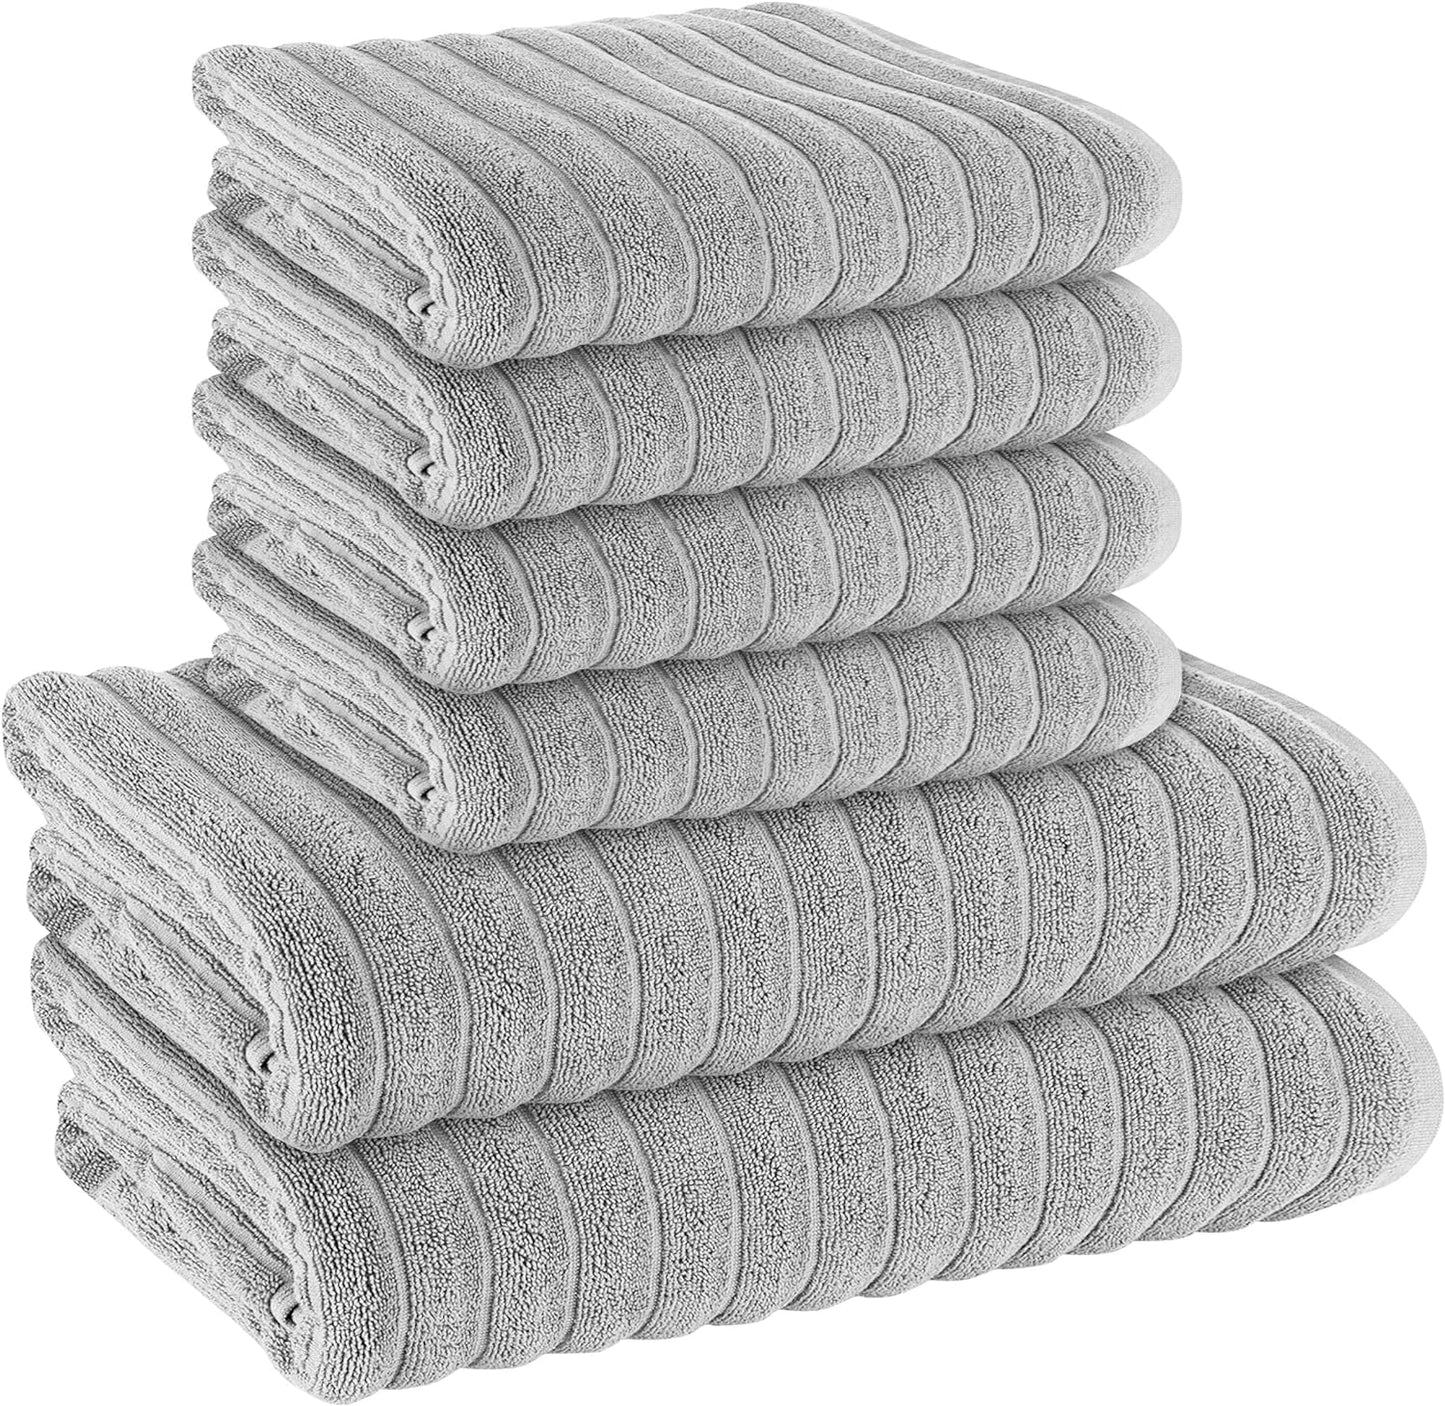 Luxurious Hydro Cotton Ribbed Towel Set by OLIVIA ROCCO Super Soft Lightweight Quick Dry Highly Absorbent Bath Sheets and Hand Towels Charcoal Bath Linens 2 Pack Jumbo Bath Sheets and 4 Hand Towels for Bathroom and Shower Durability and High Quality